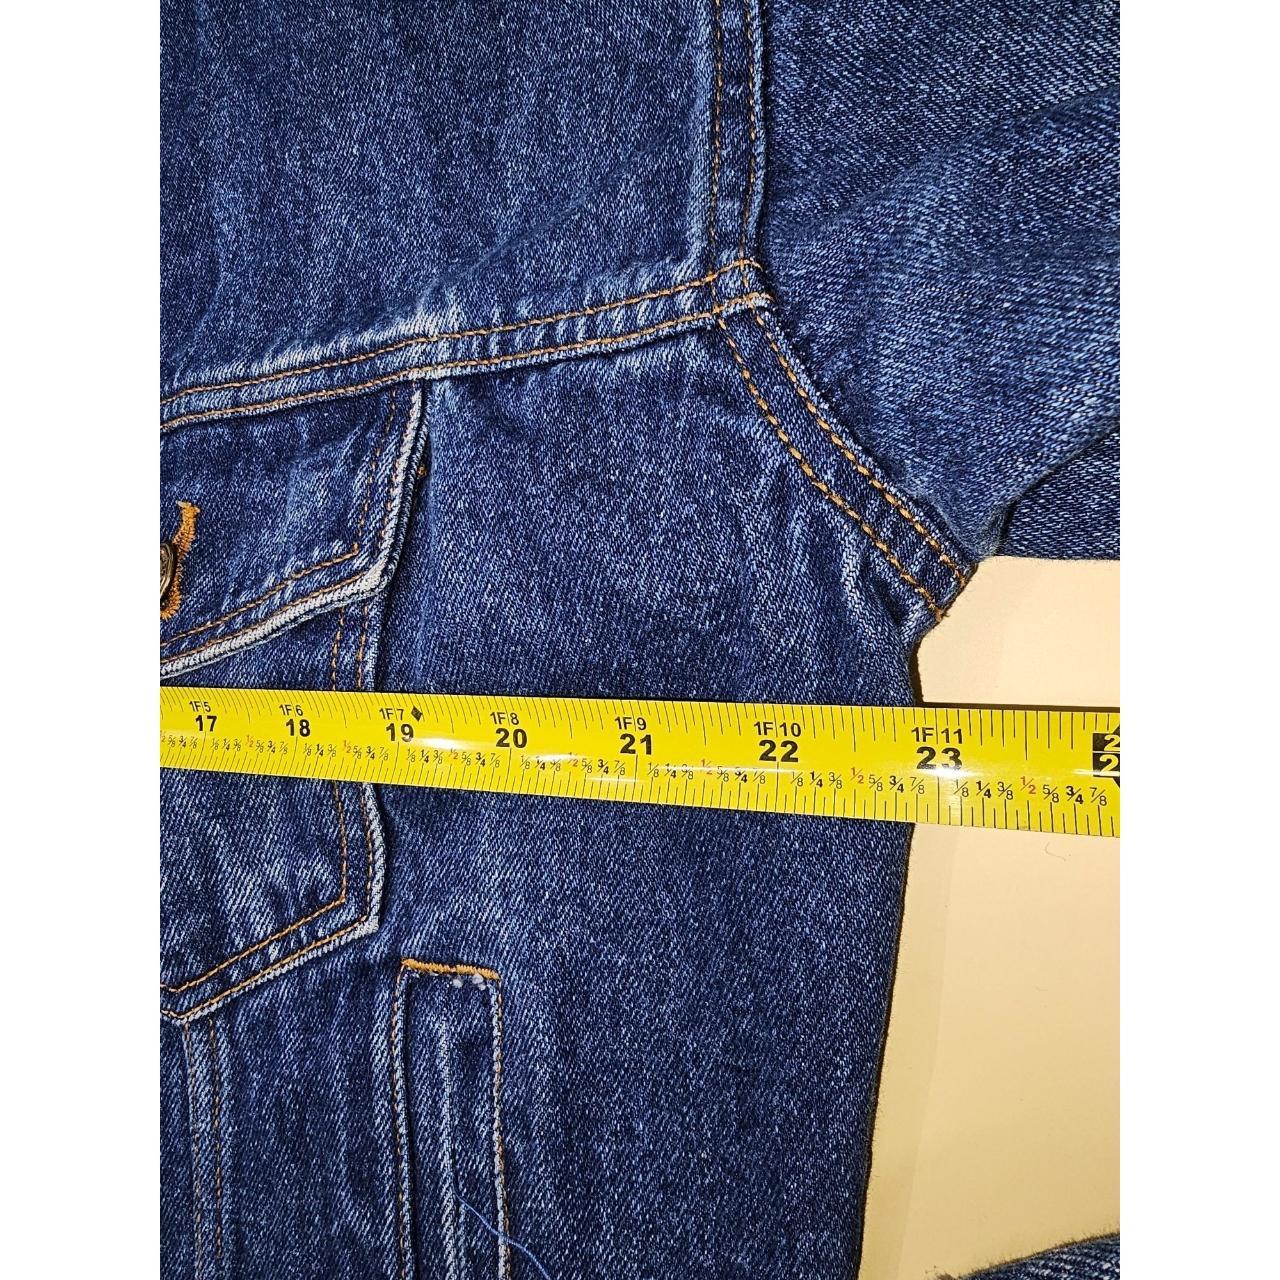 Nice jean jacket by Marlboro Country store and... - Depop